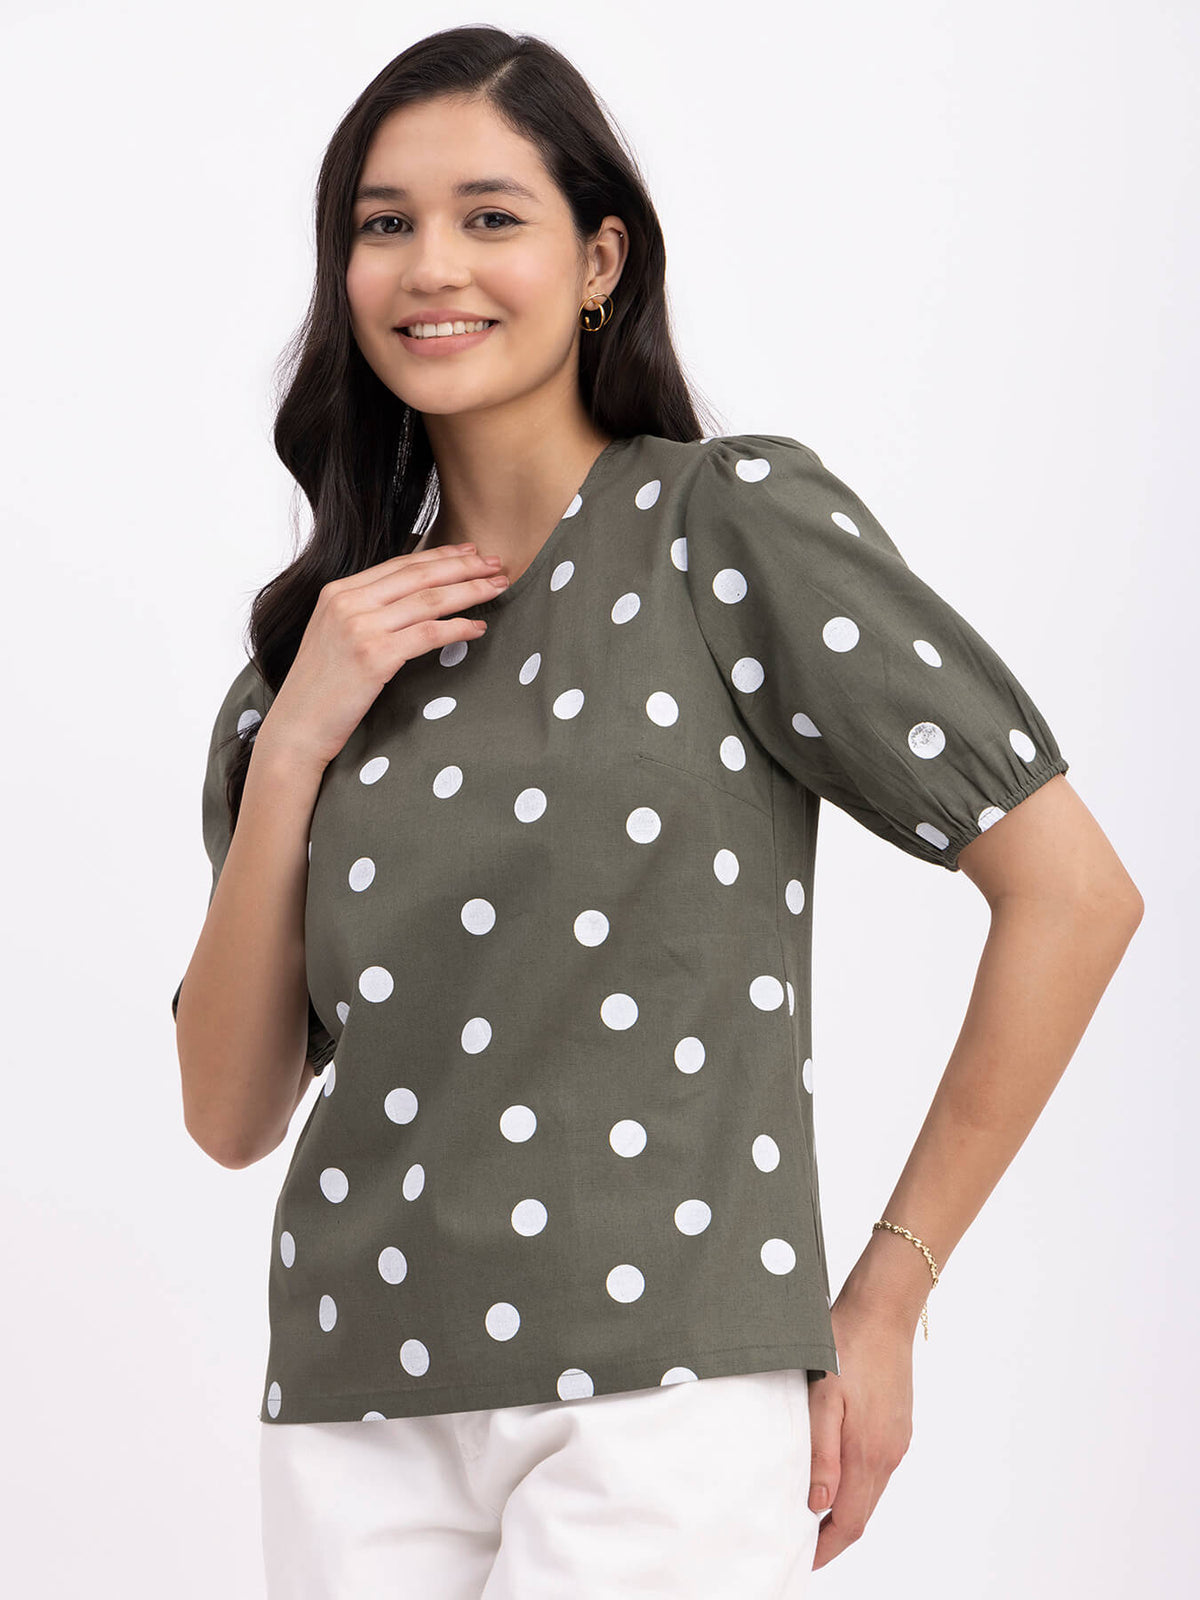 Linen Polka Dot Top - Olive And White